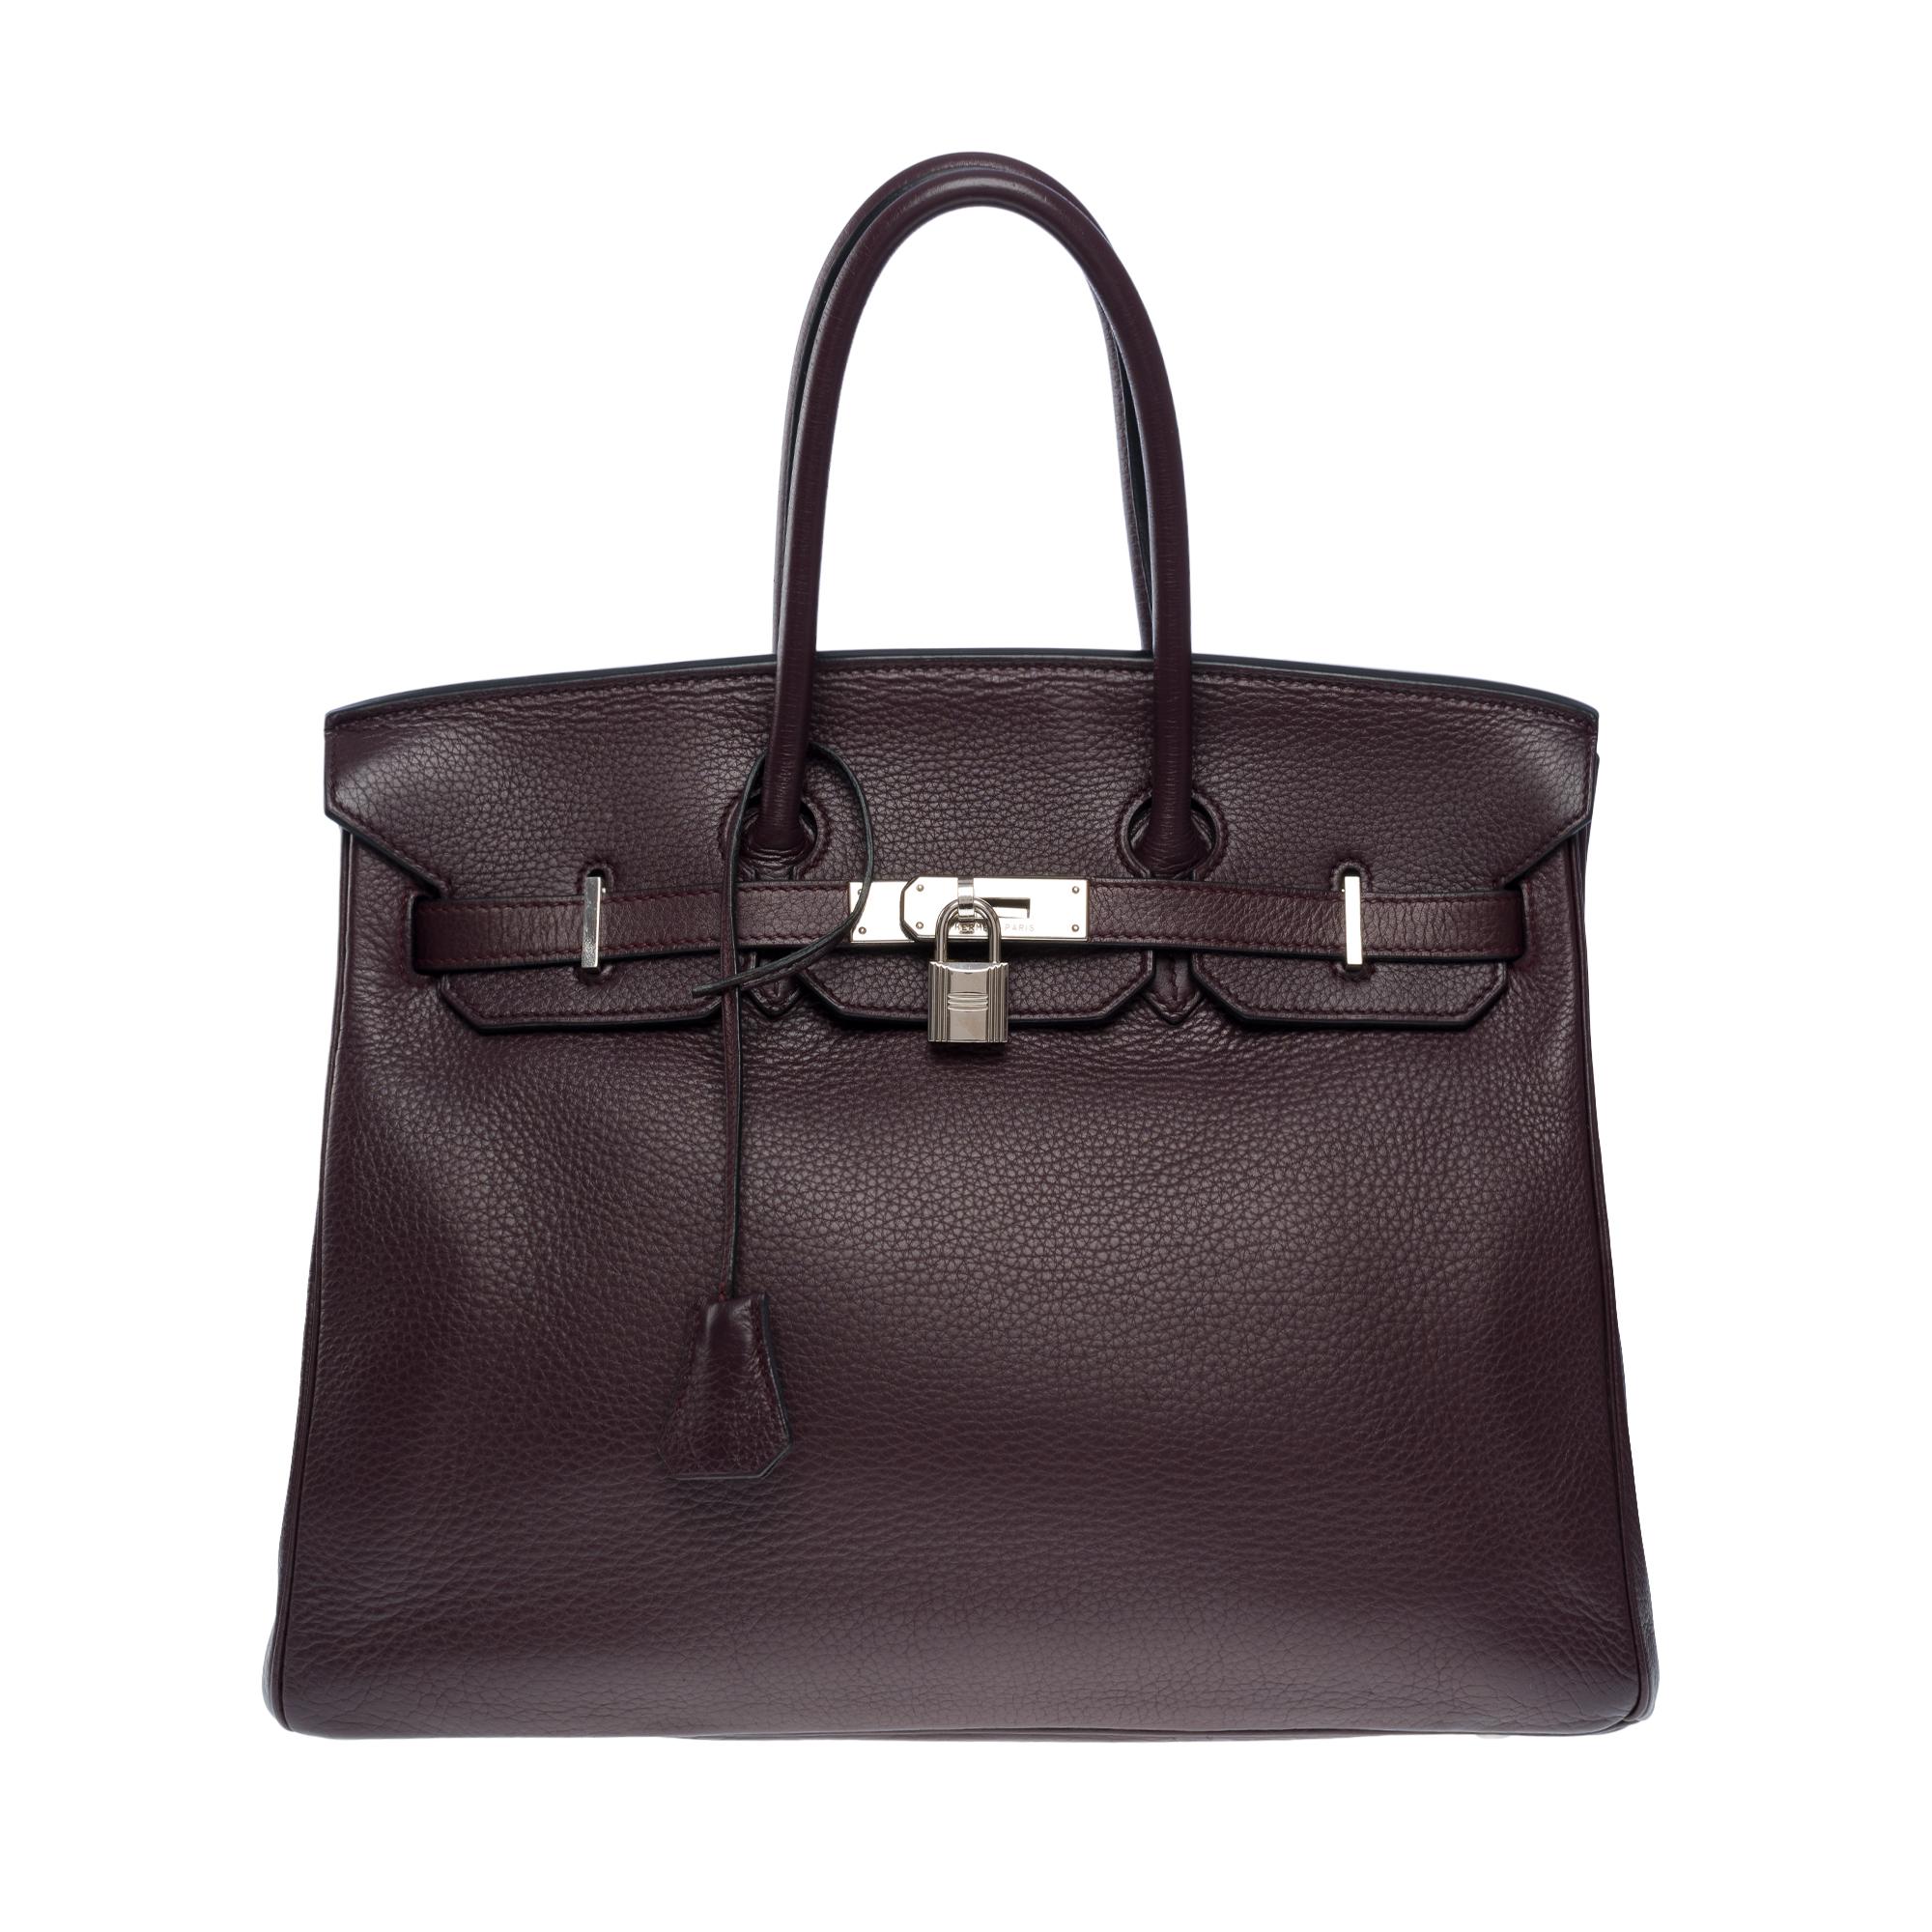 Superb​​ ​​Hermes​​ ​​Birkin​​ ​​35​​ ​​handbag​​ ​​in​​​ ​​Togo​ ​​leather​ ​Raisin​ ​,​​ ​​palladium​​ ​​silver​​ ​​metal​​ ​​hardware,​​ ​​double​​ ​​handle​​ ​​in​​ ​purple​​ ​​leather​​ ​​allowing​​ ​​a​​ ​​hand​​ ​​carry

Flap​​